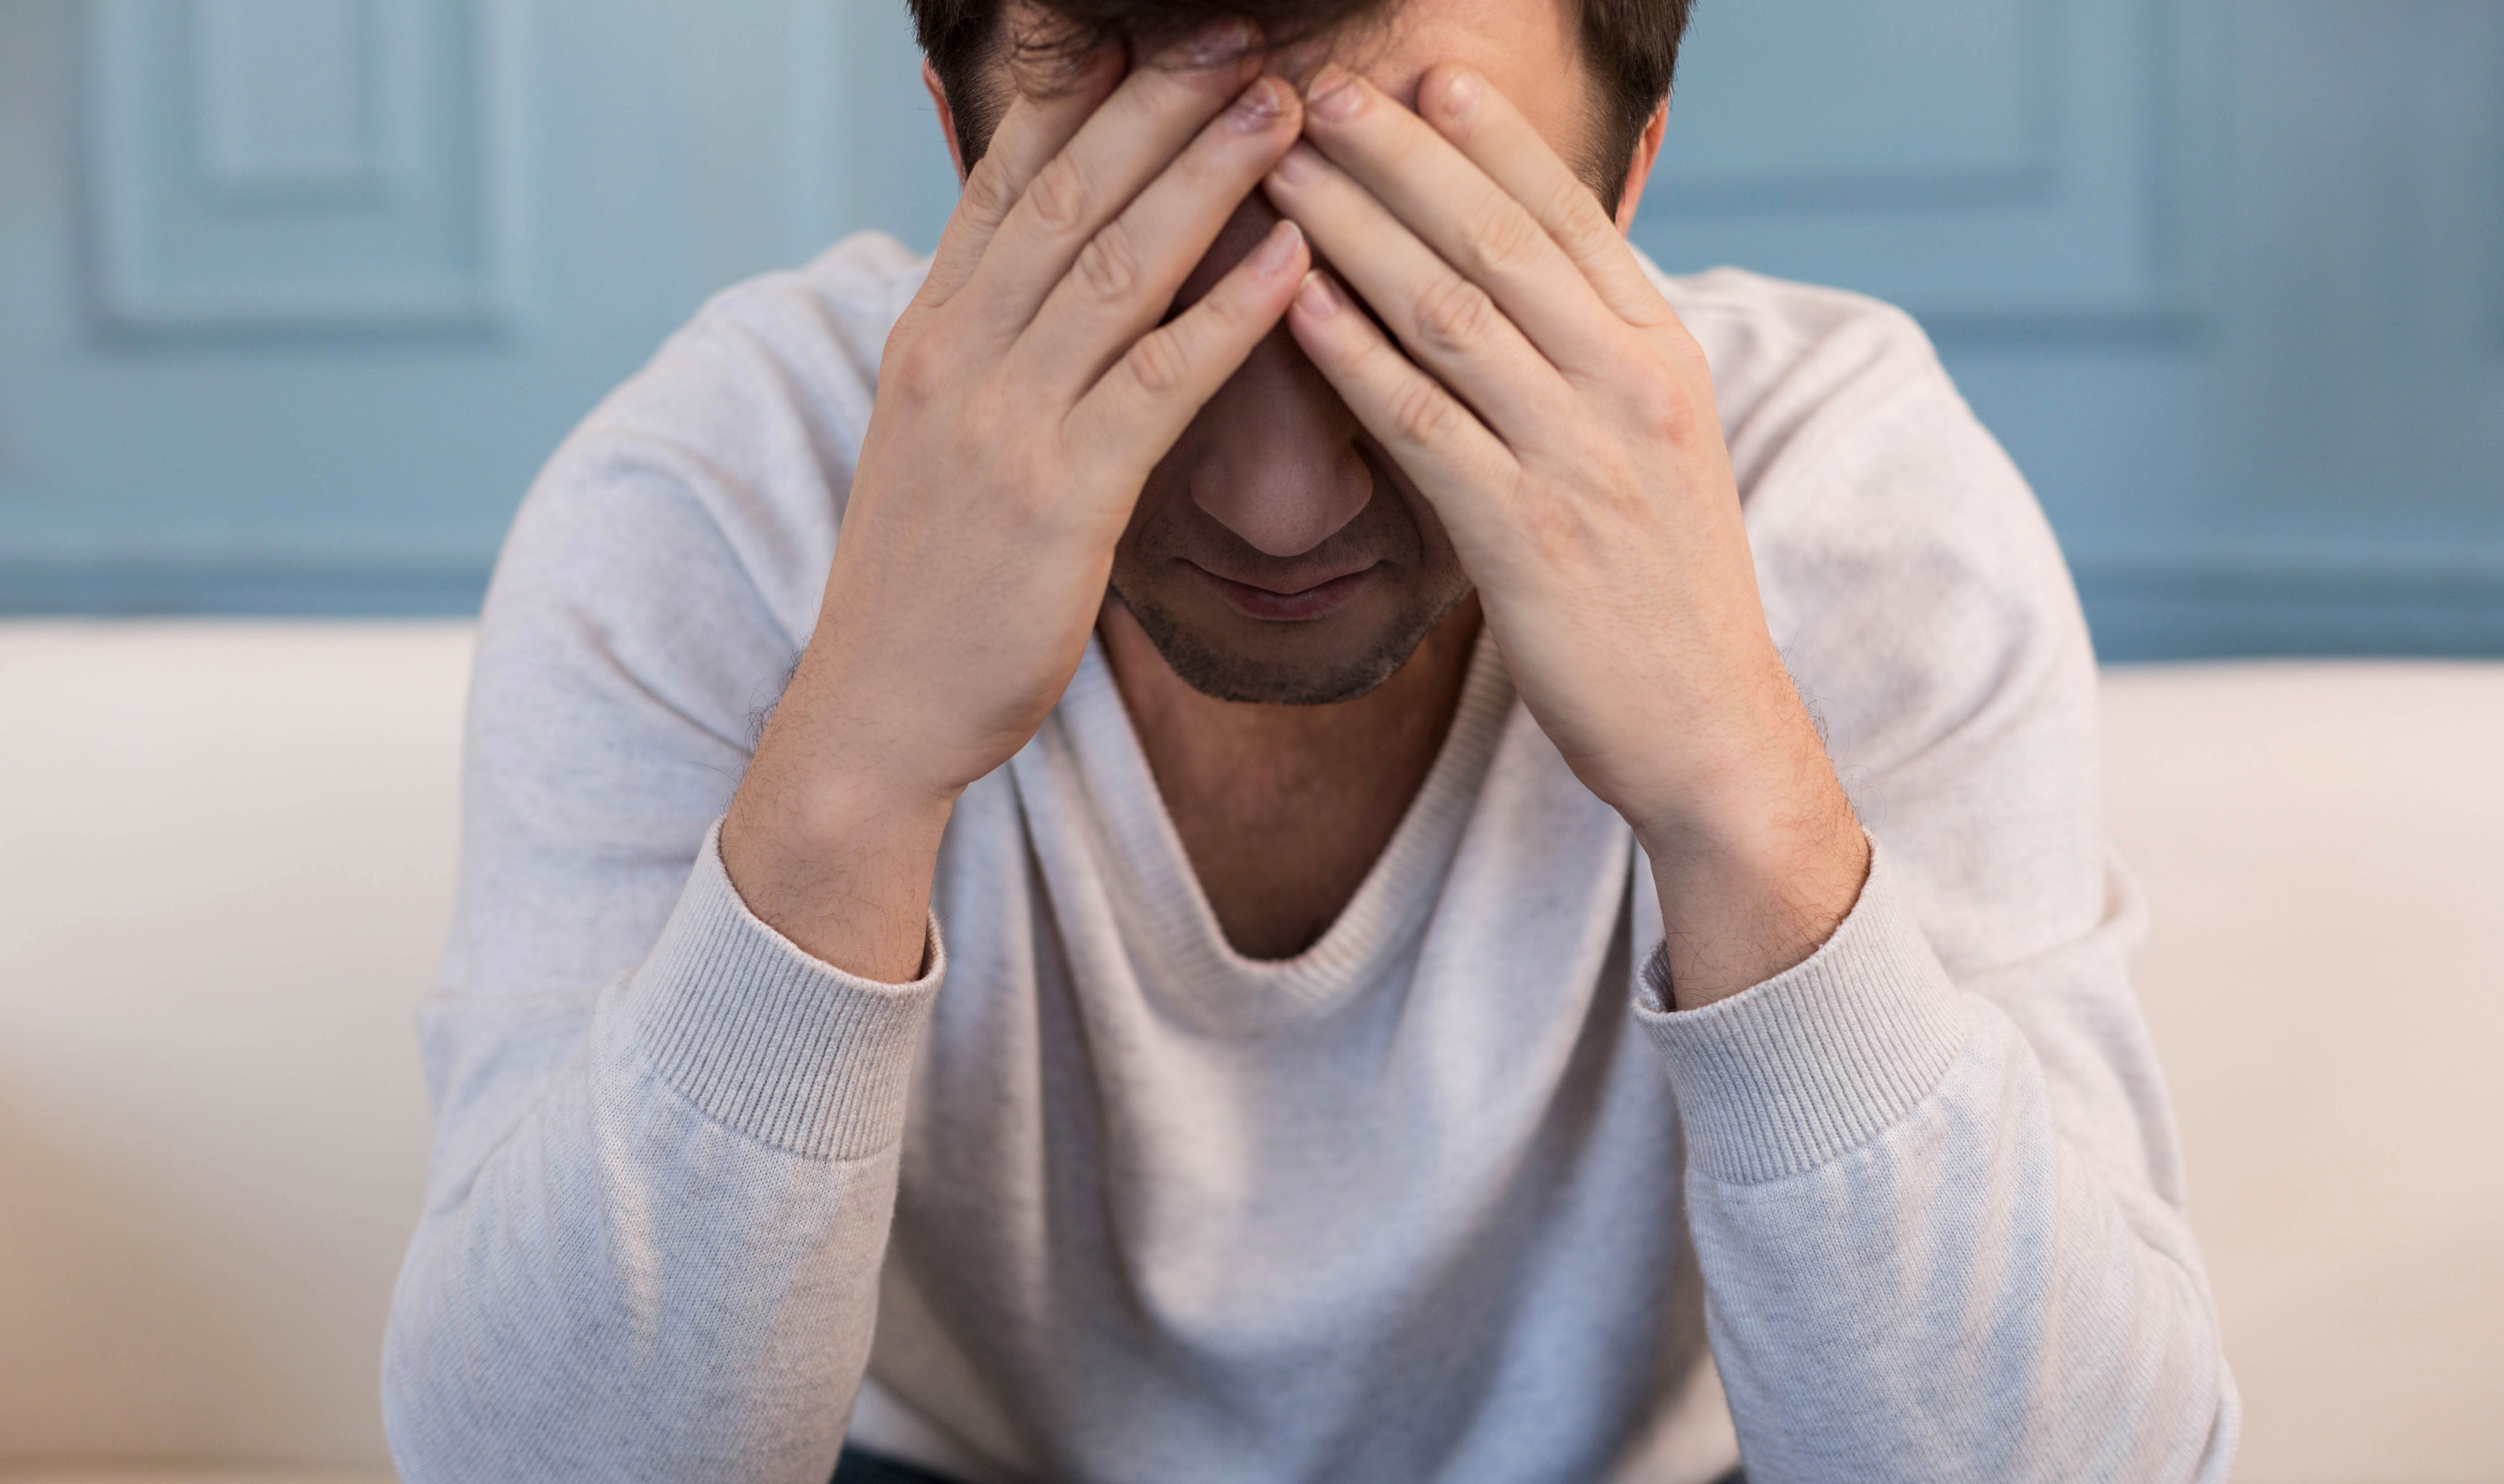 Sad cheerless man covering his face. | Source: Shutterstock